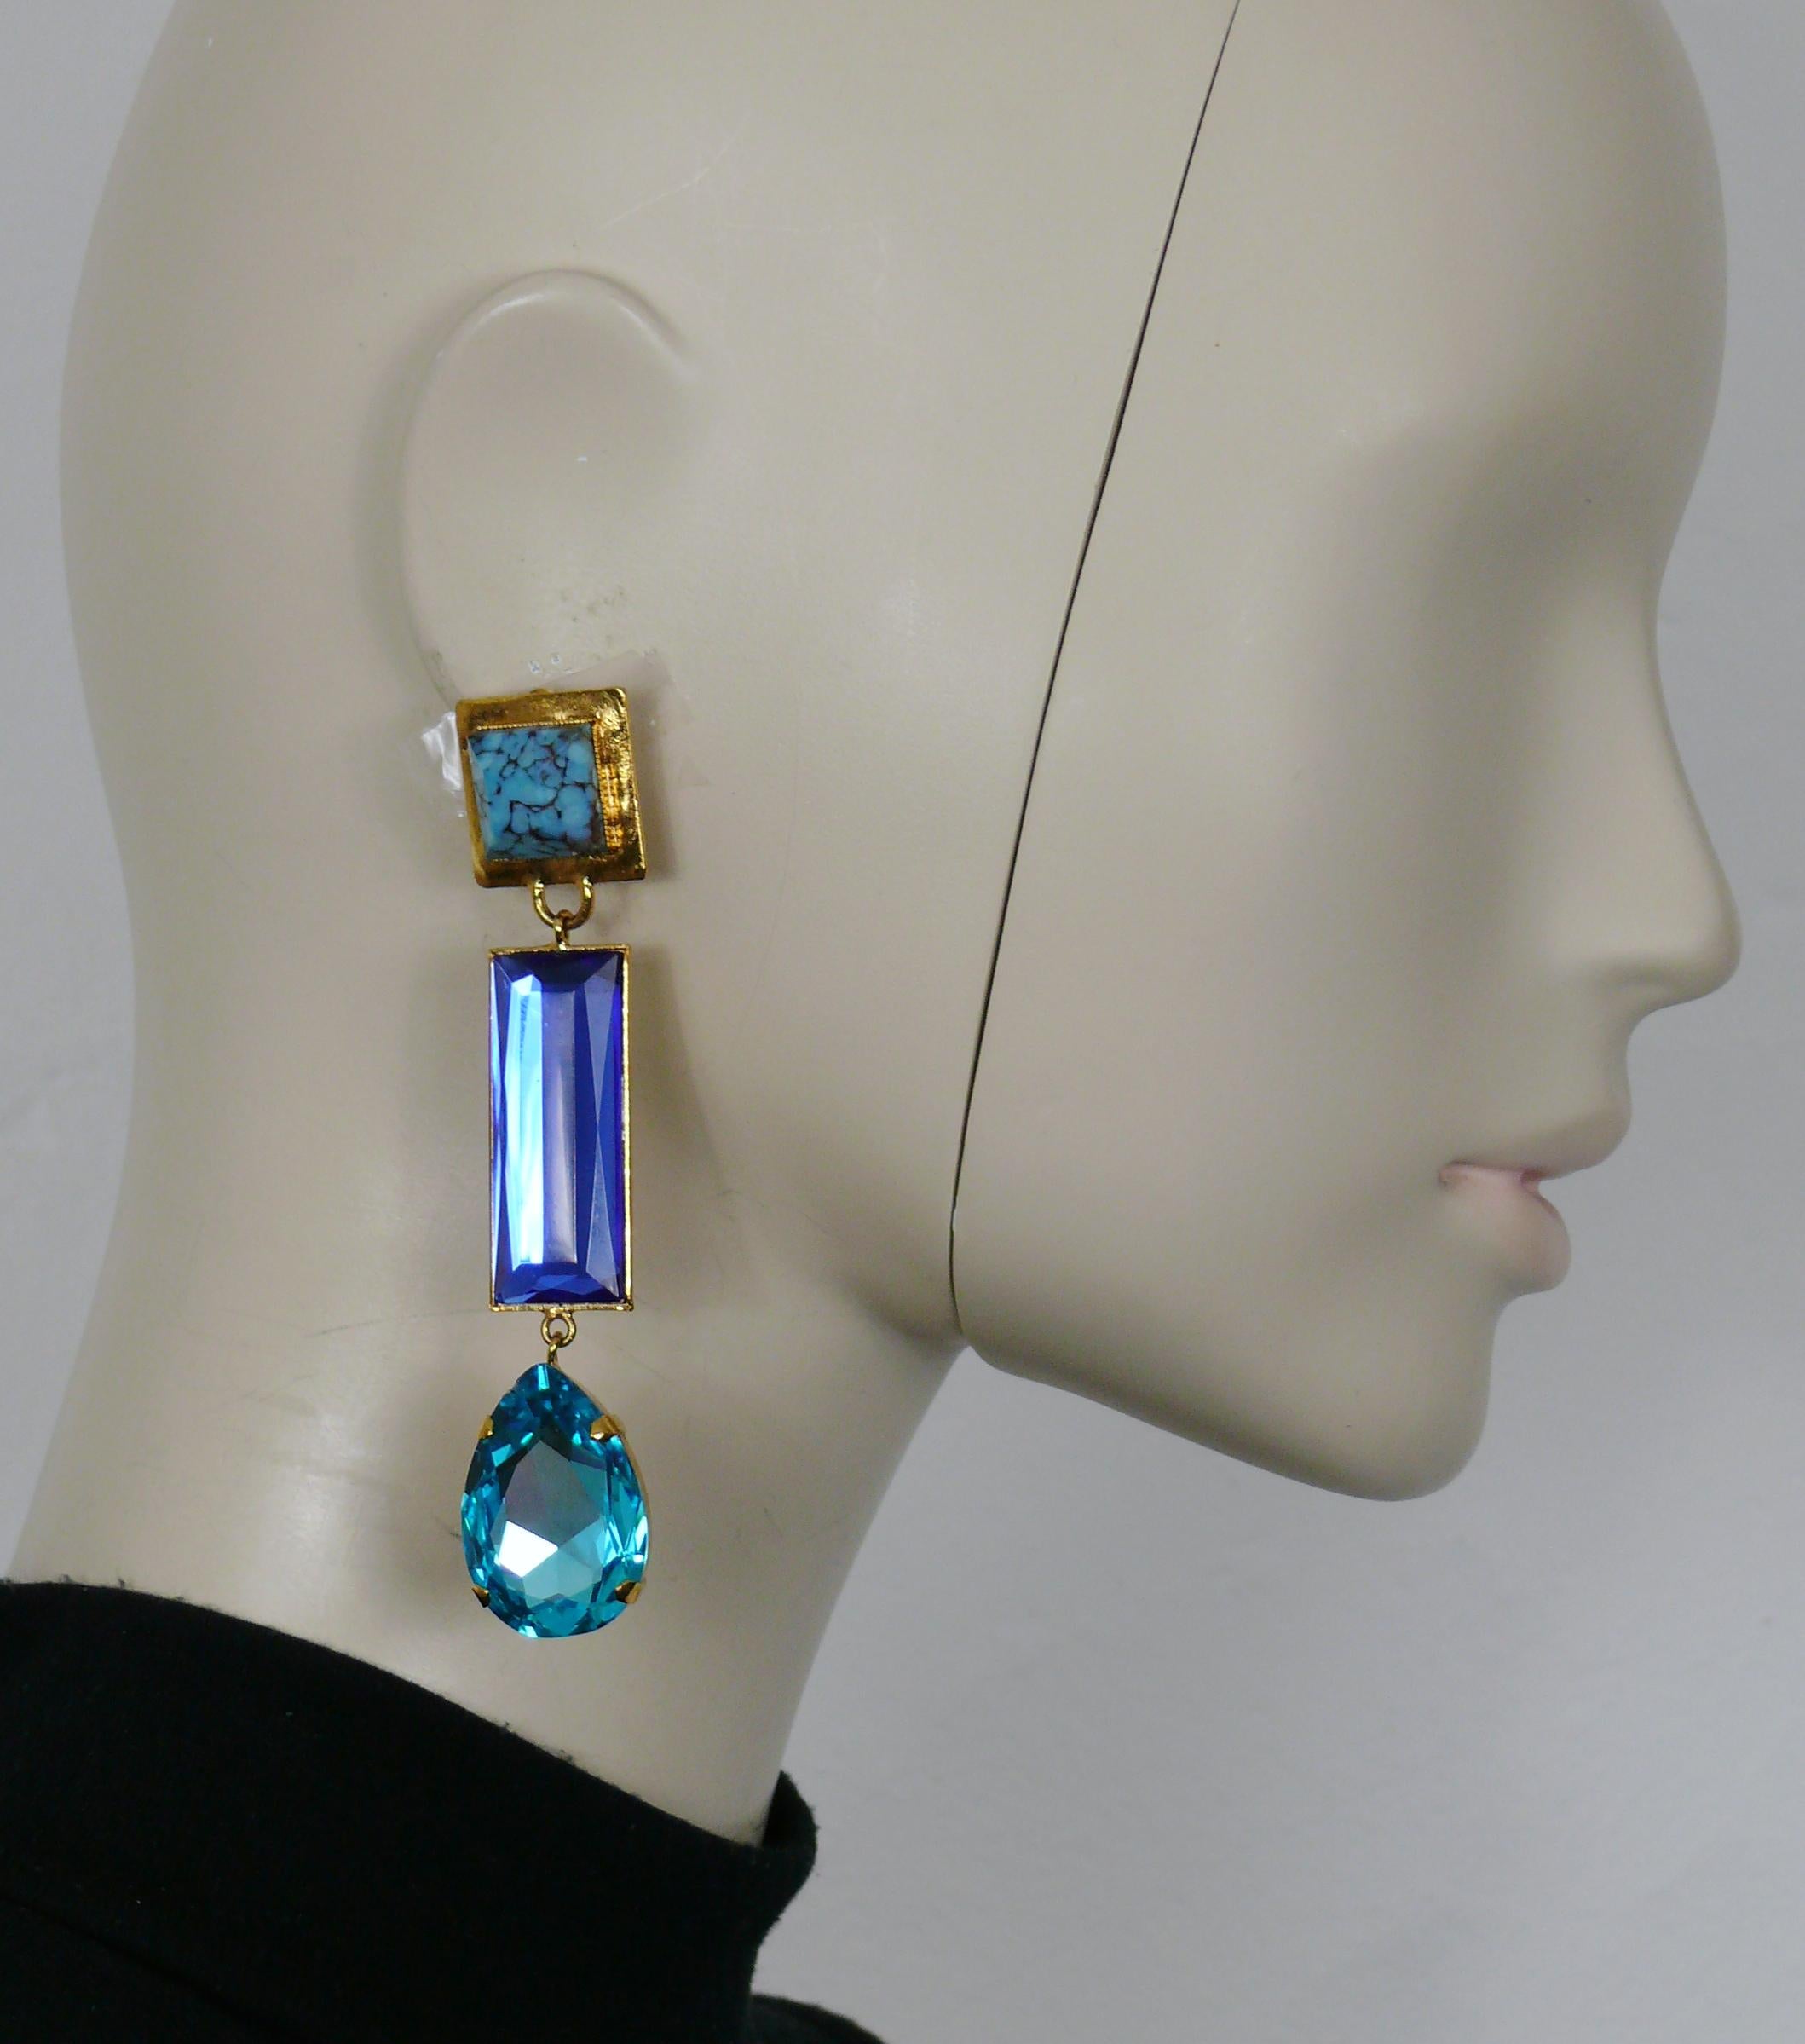 YVES SAINT LAURENT vintage gold tone dangling earrings (clip-on) featuring a faux turquoise cabochon and blue shade crystals.

Embossed YSL.

Indicative measurements : height approx. 10 cm (3.94 inches) / max. width approx. 2 cm (0.79